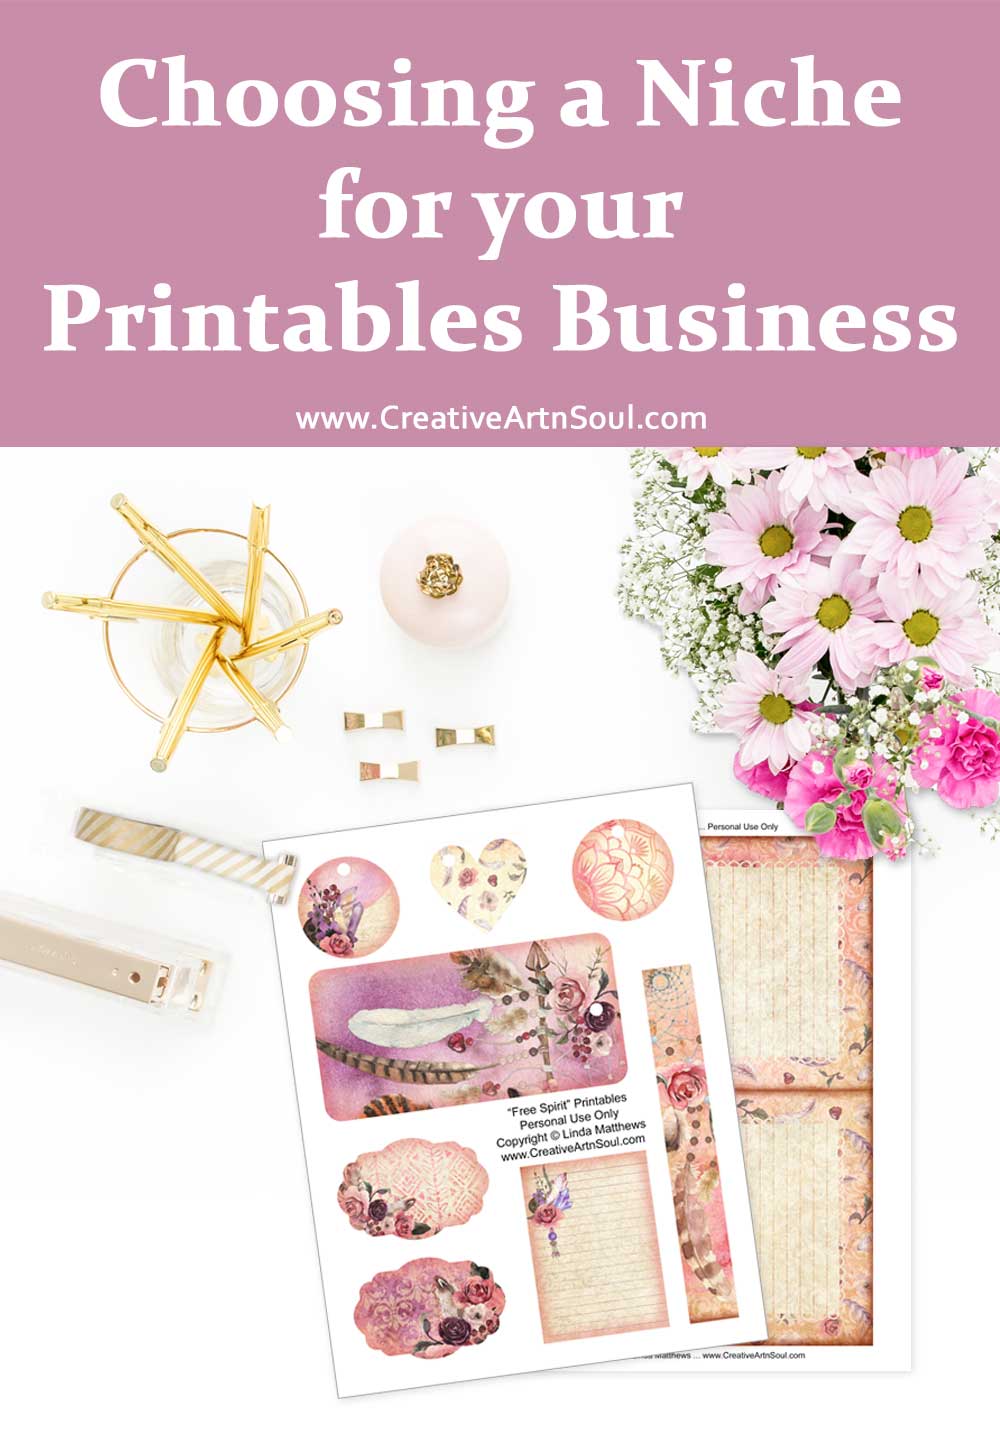 Choosing a Niche for Your Printables Business